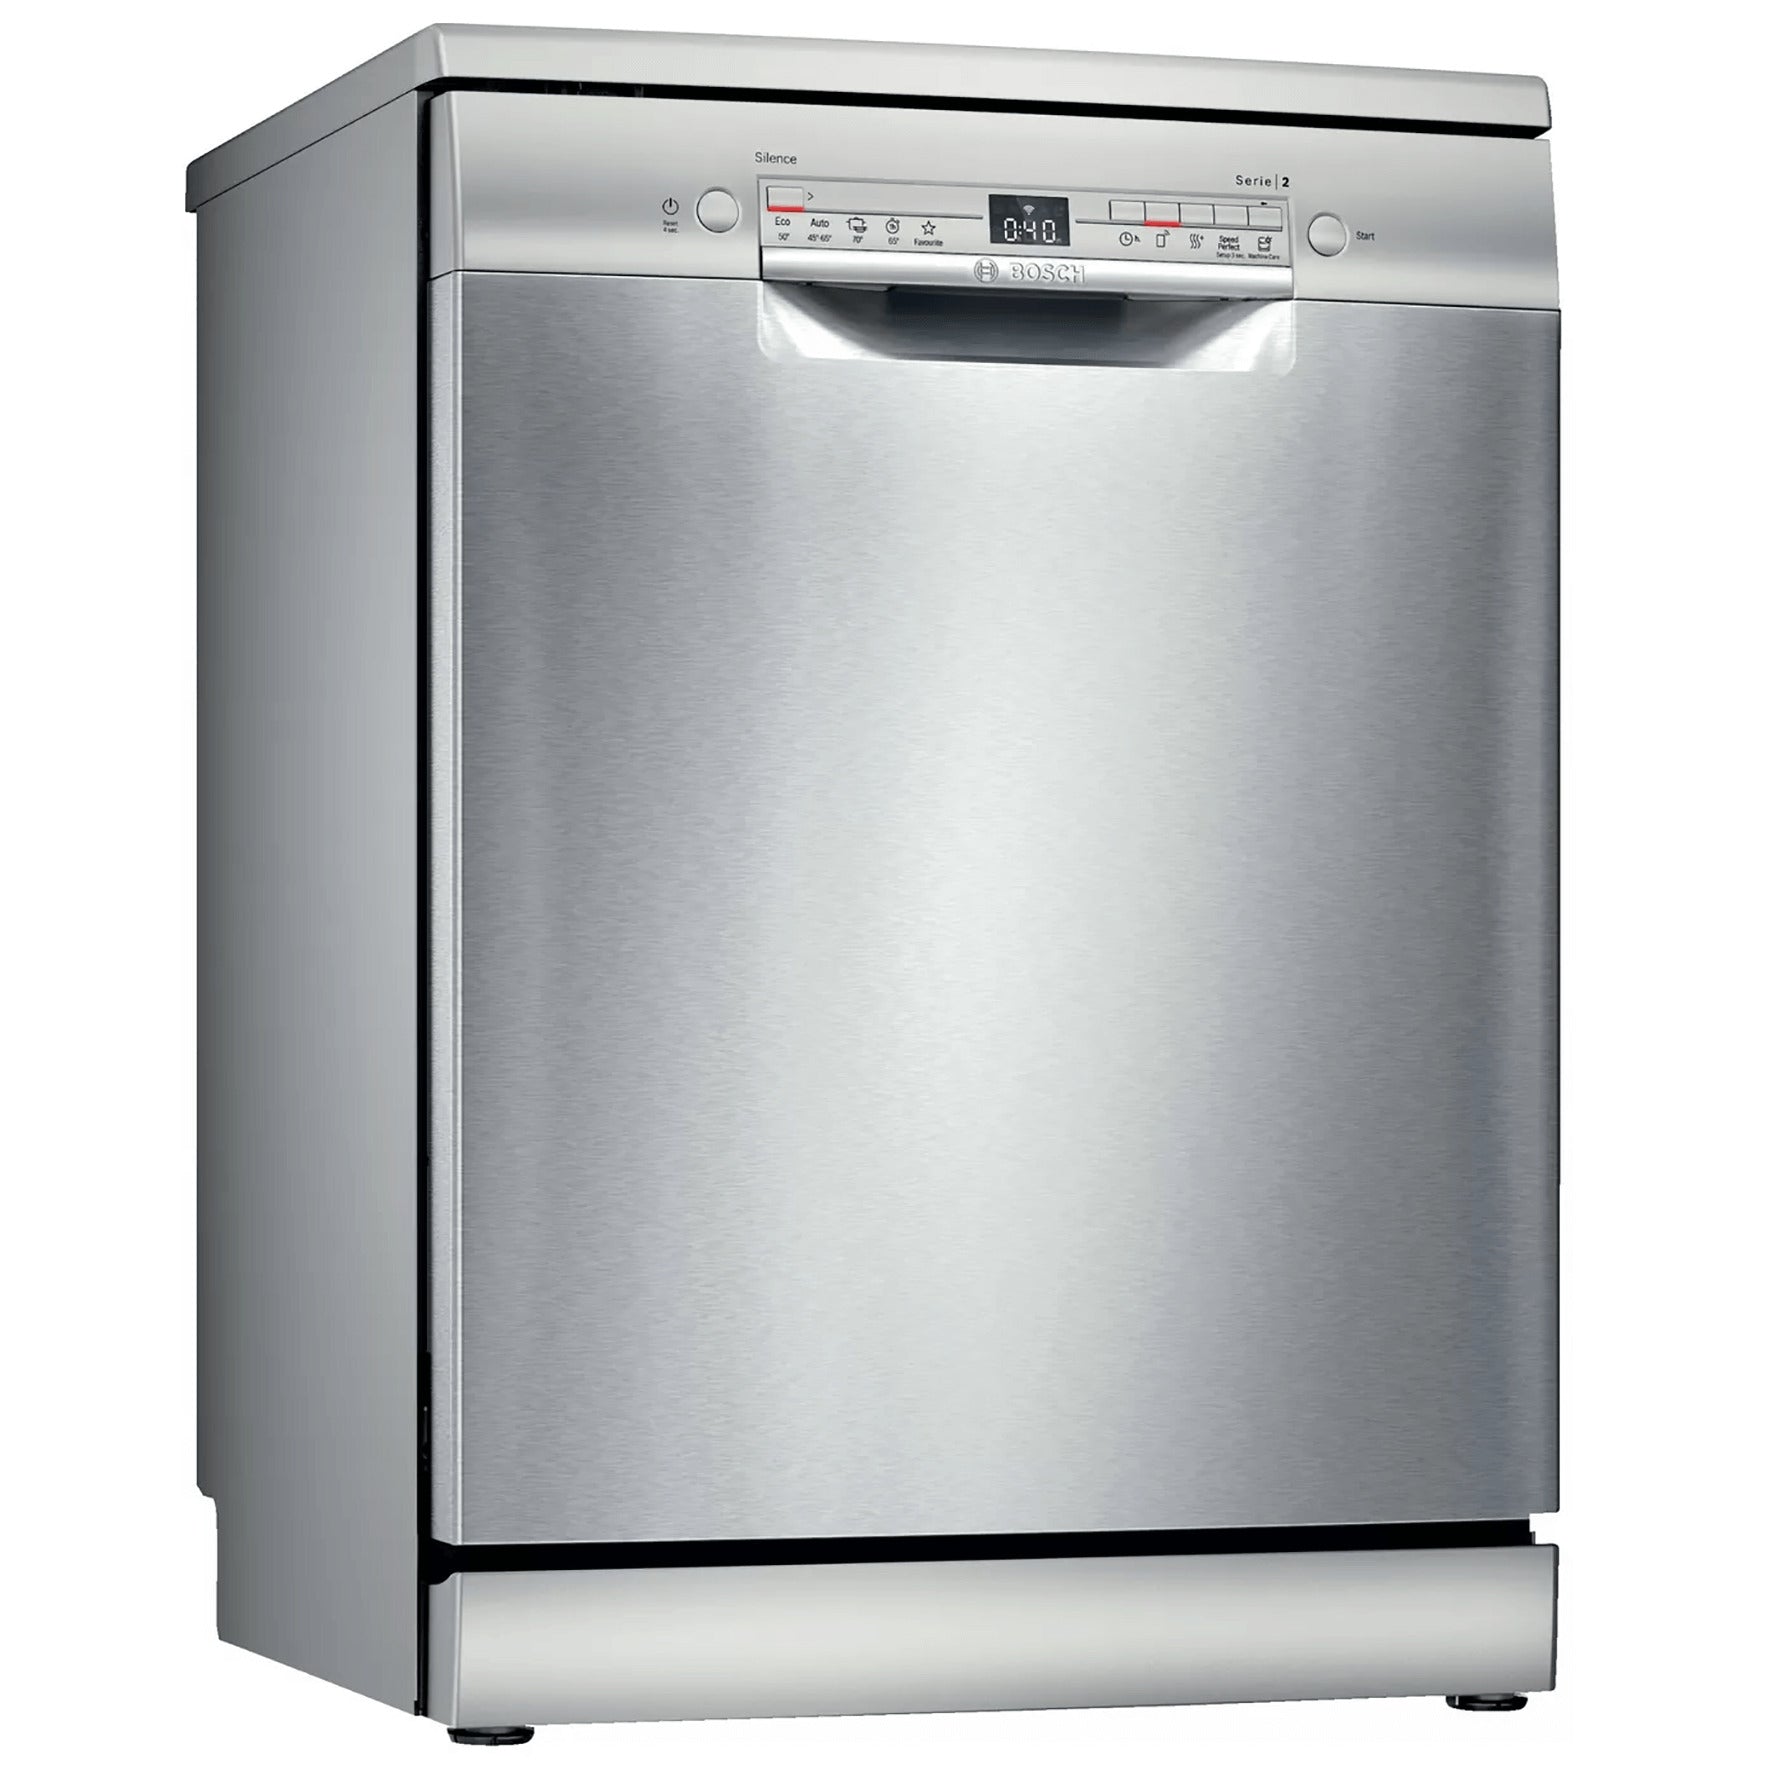 Bosch 12 Place Setting Dishwasher Stainless Steel SMS2ITI06Z